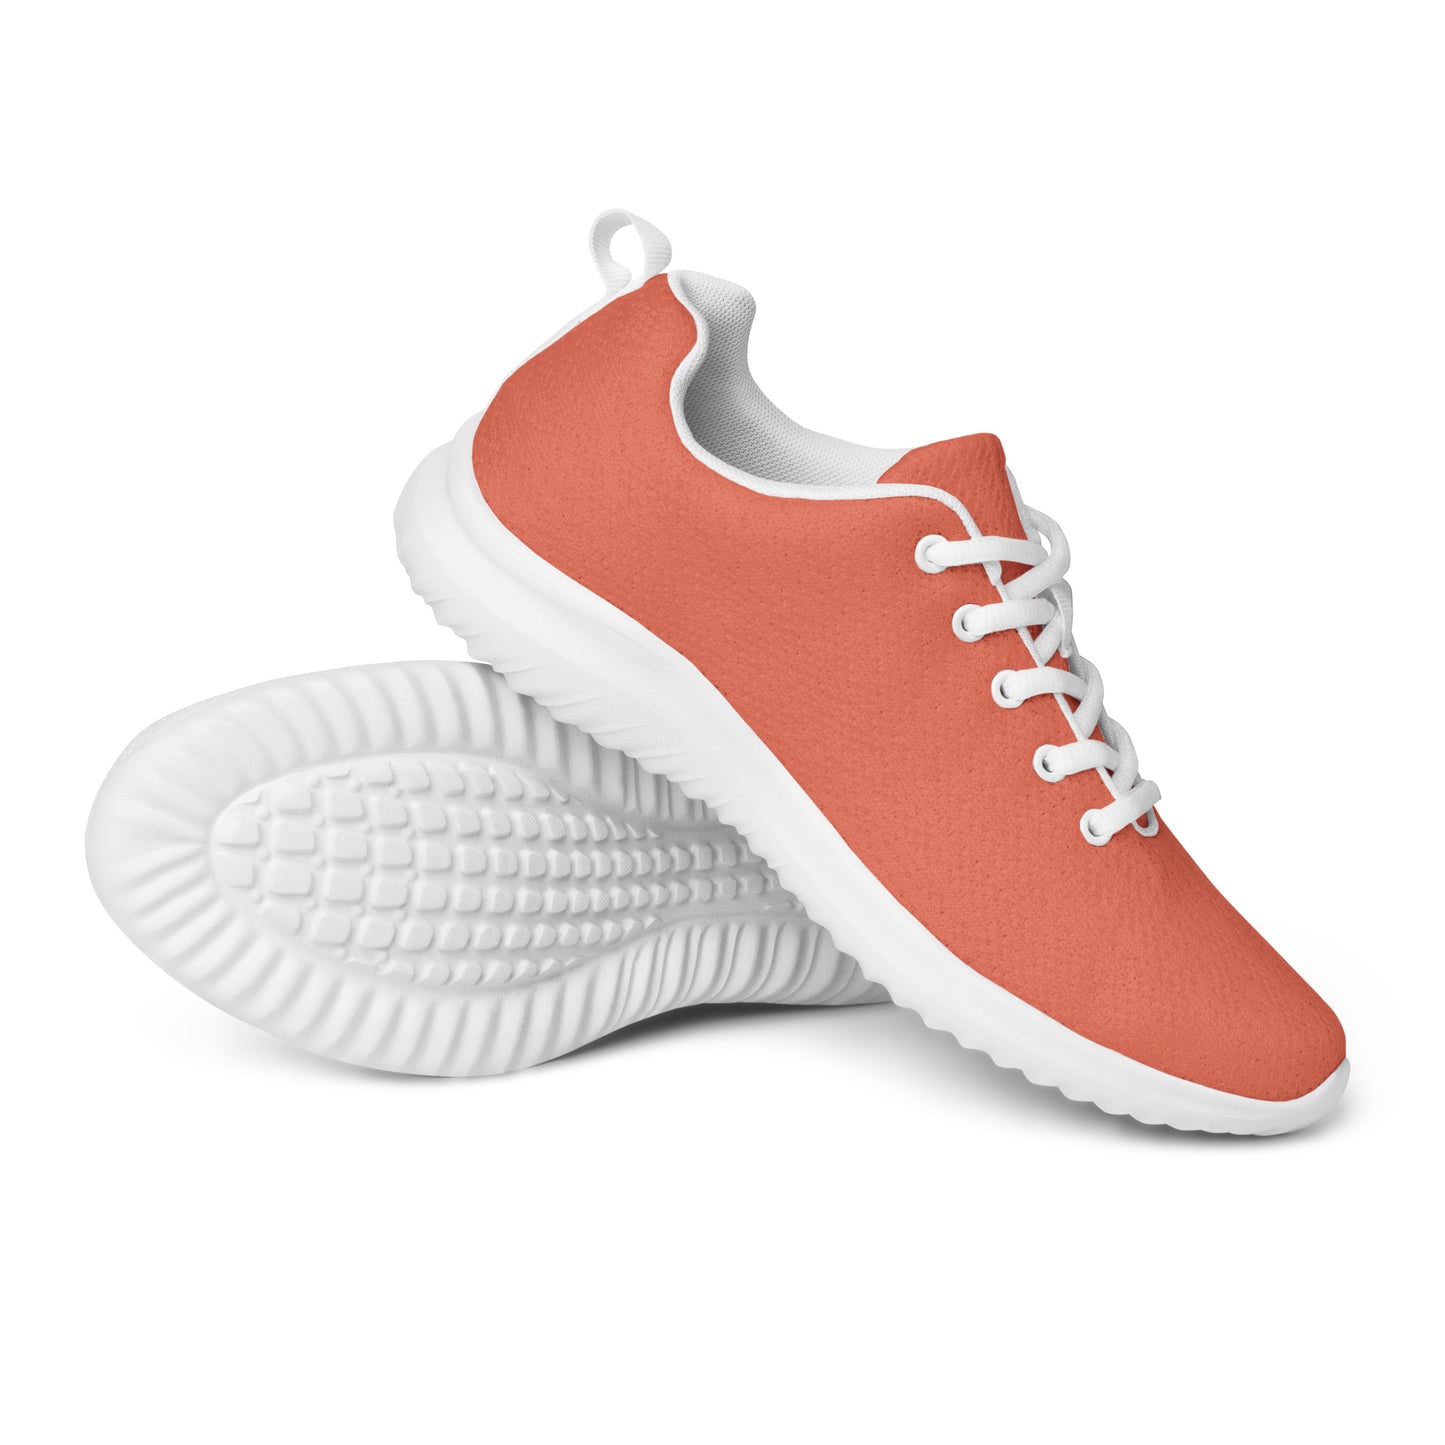 Snooty Fox Art Women’s Athletic Shoes - Peach Pink Color